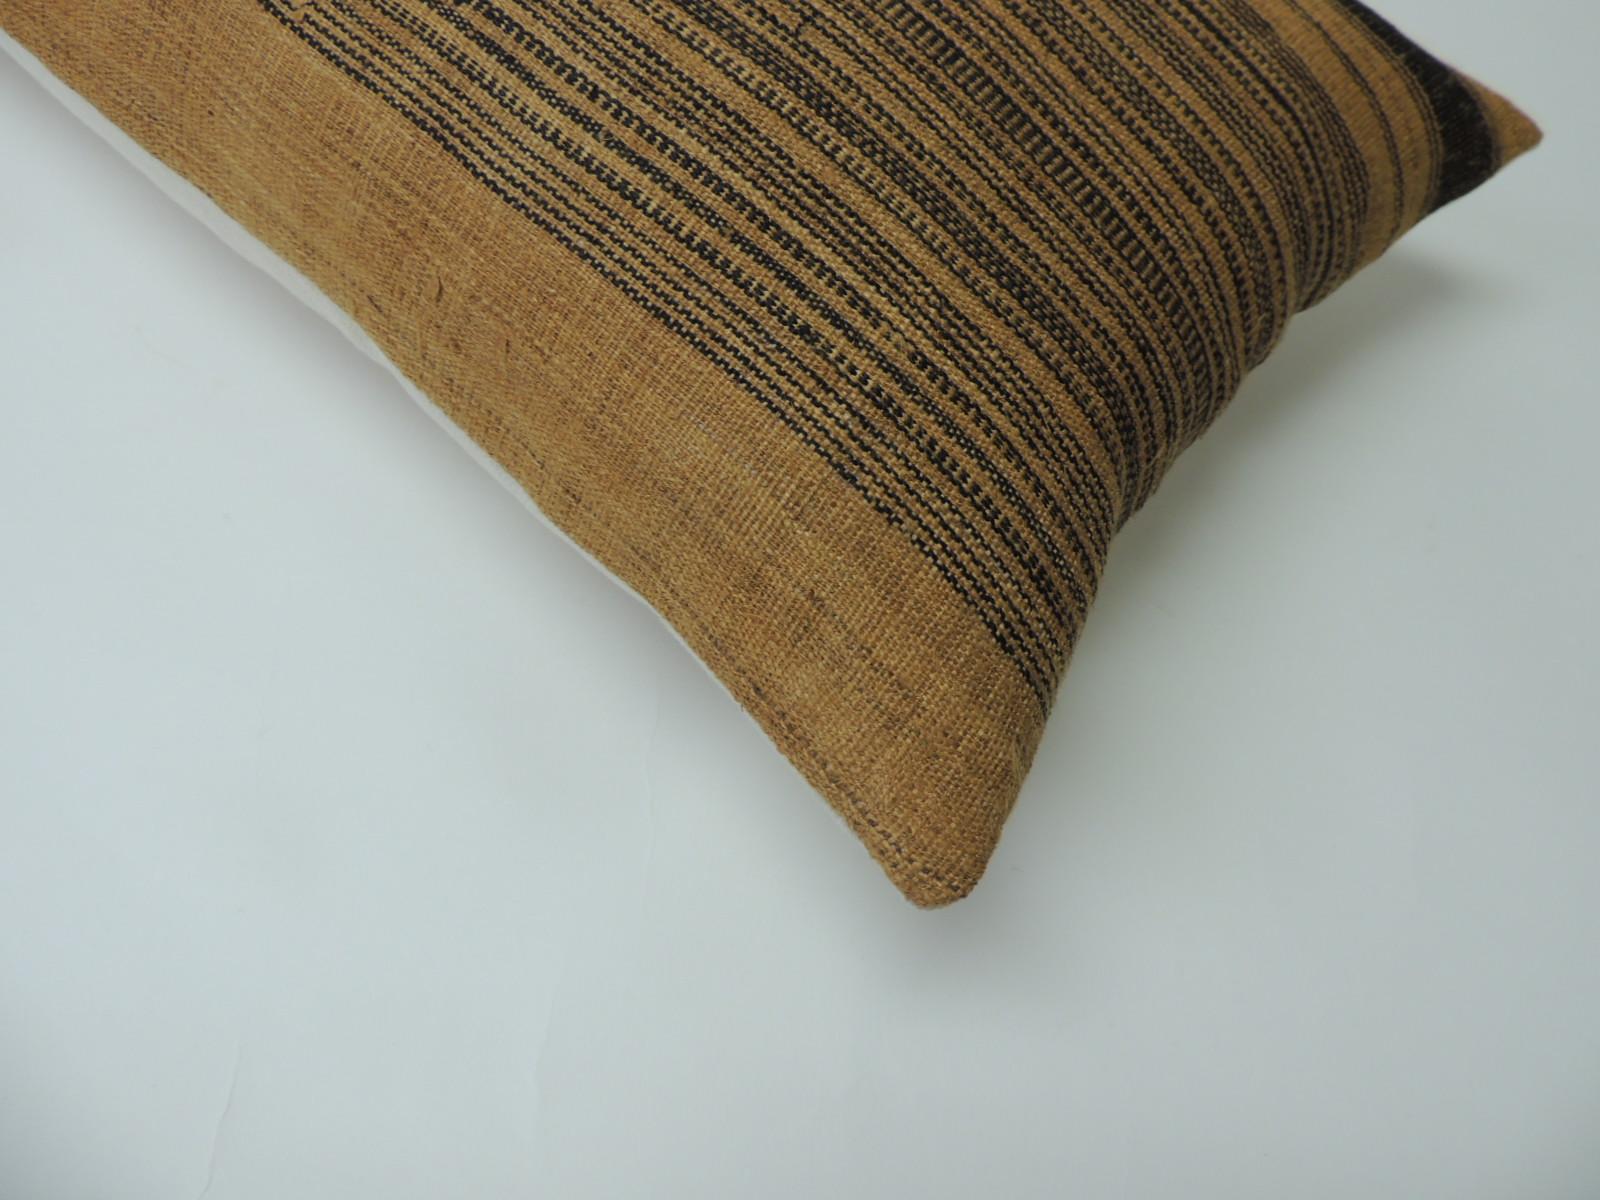 Asian orange and brown woven 